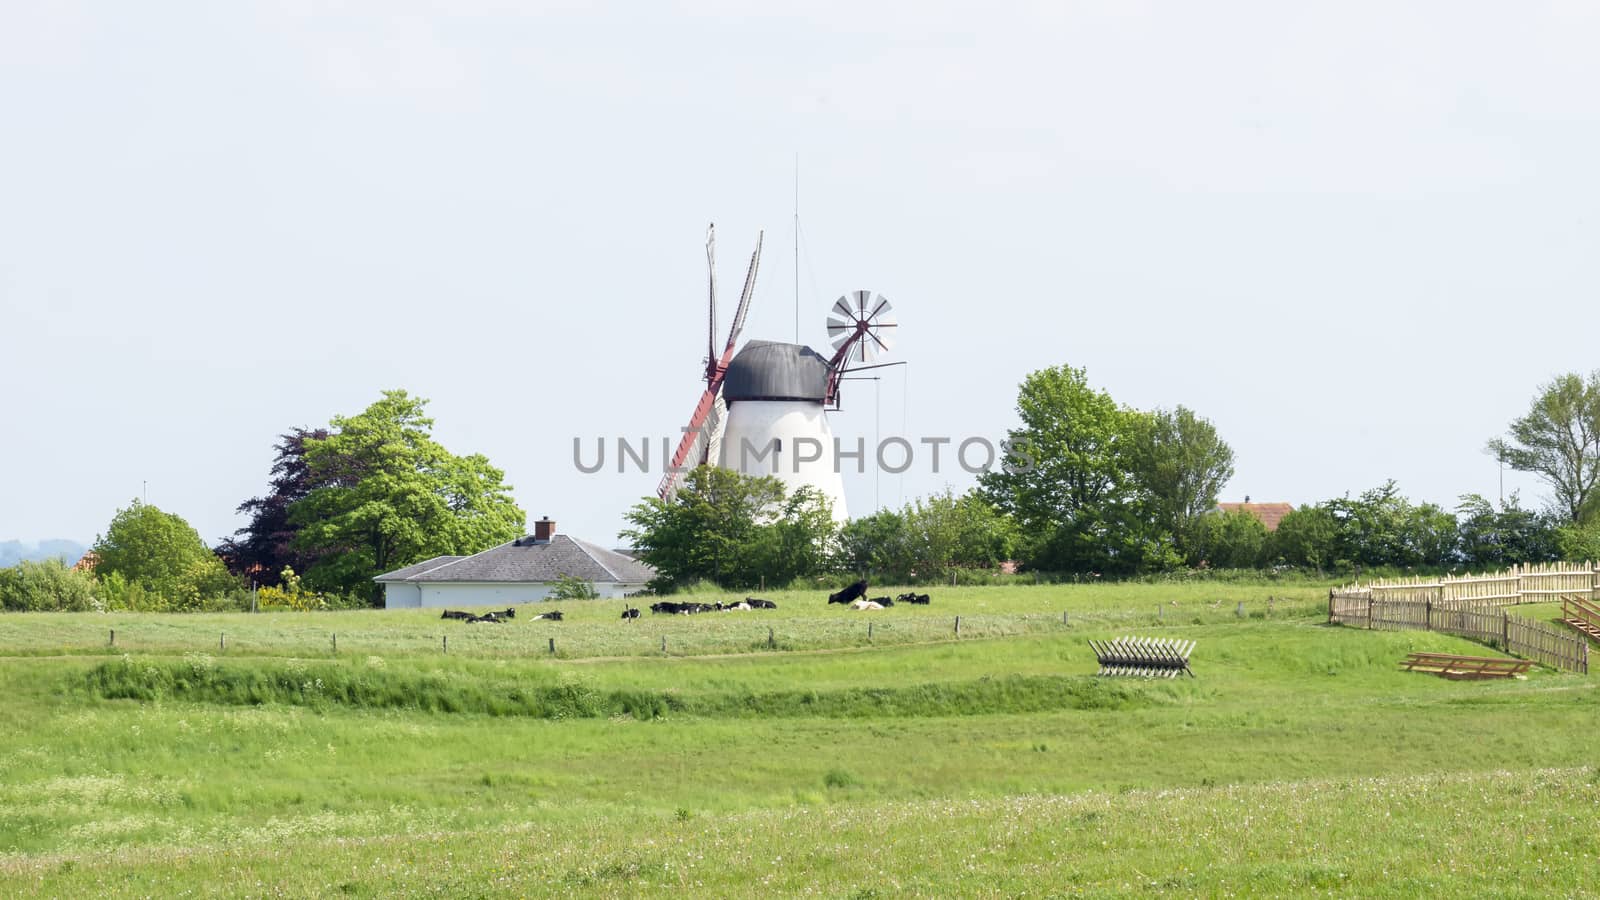 Windmill and barn in green fields of dybbol molle in sonderborg denmark horizontal panoramic